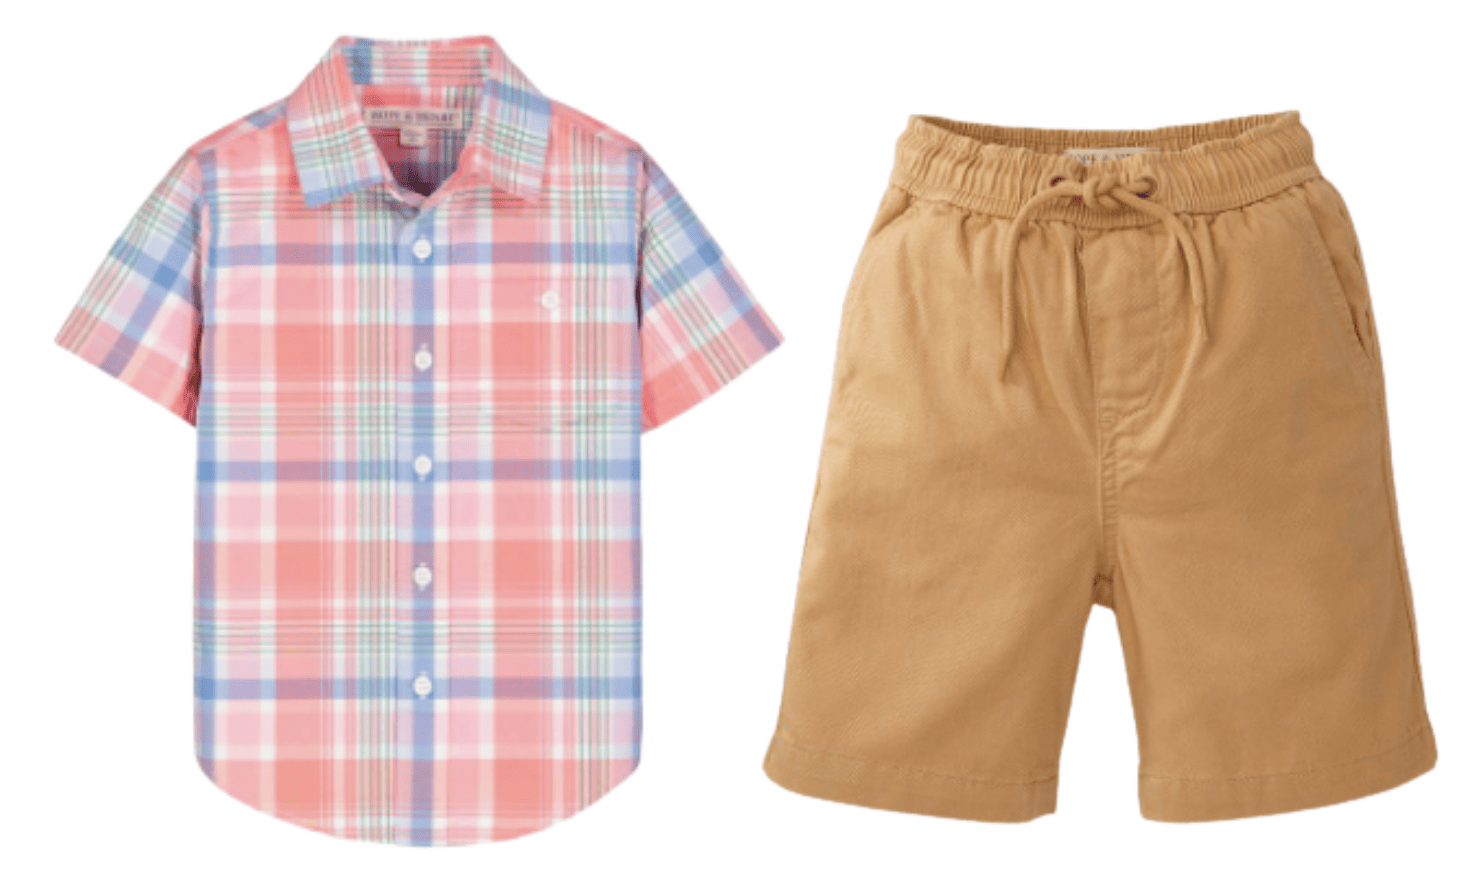 10 Spring and Summer Outfits for Toddler Boys